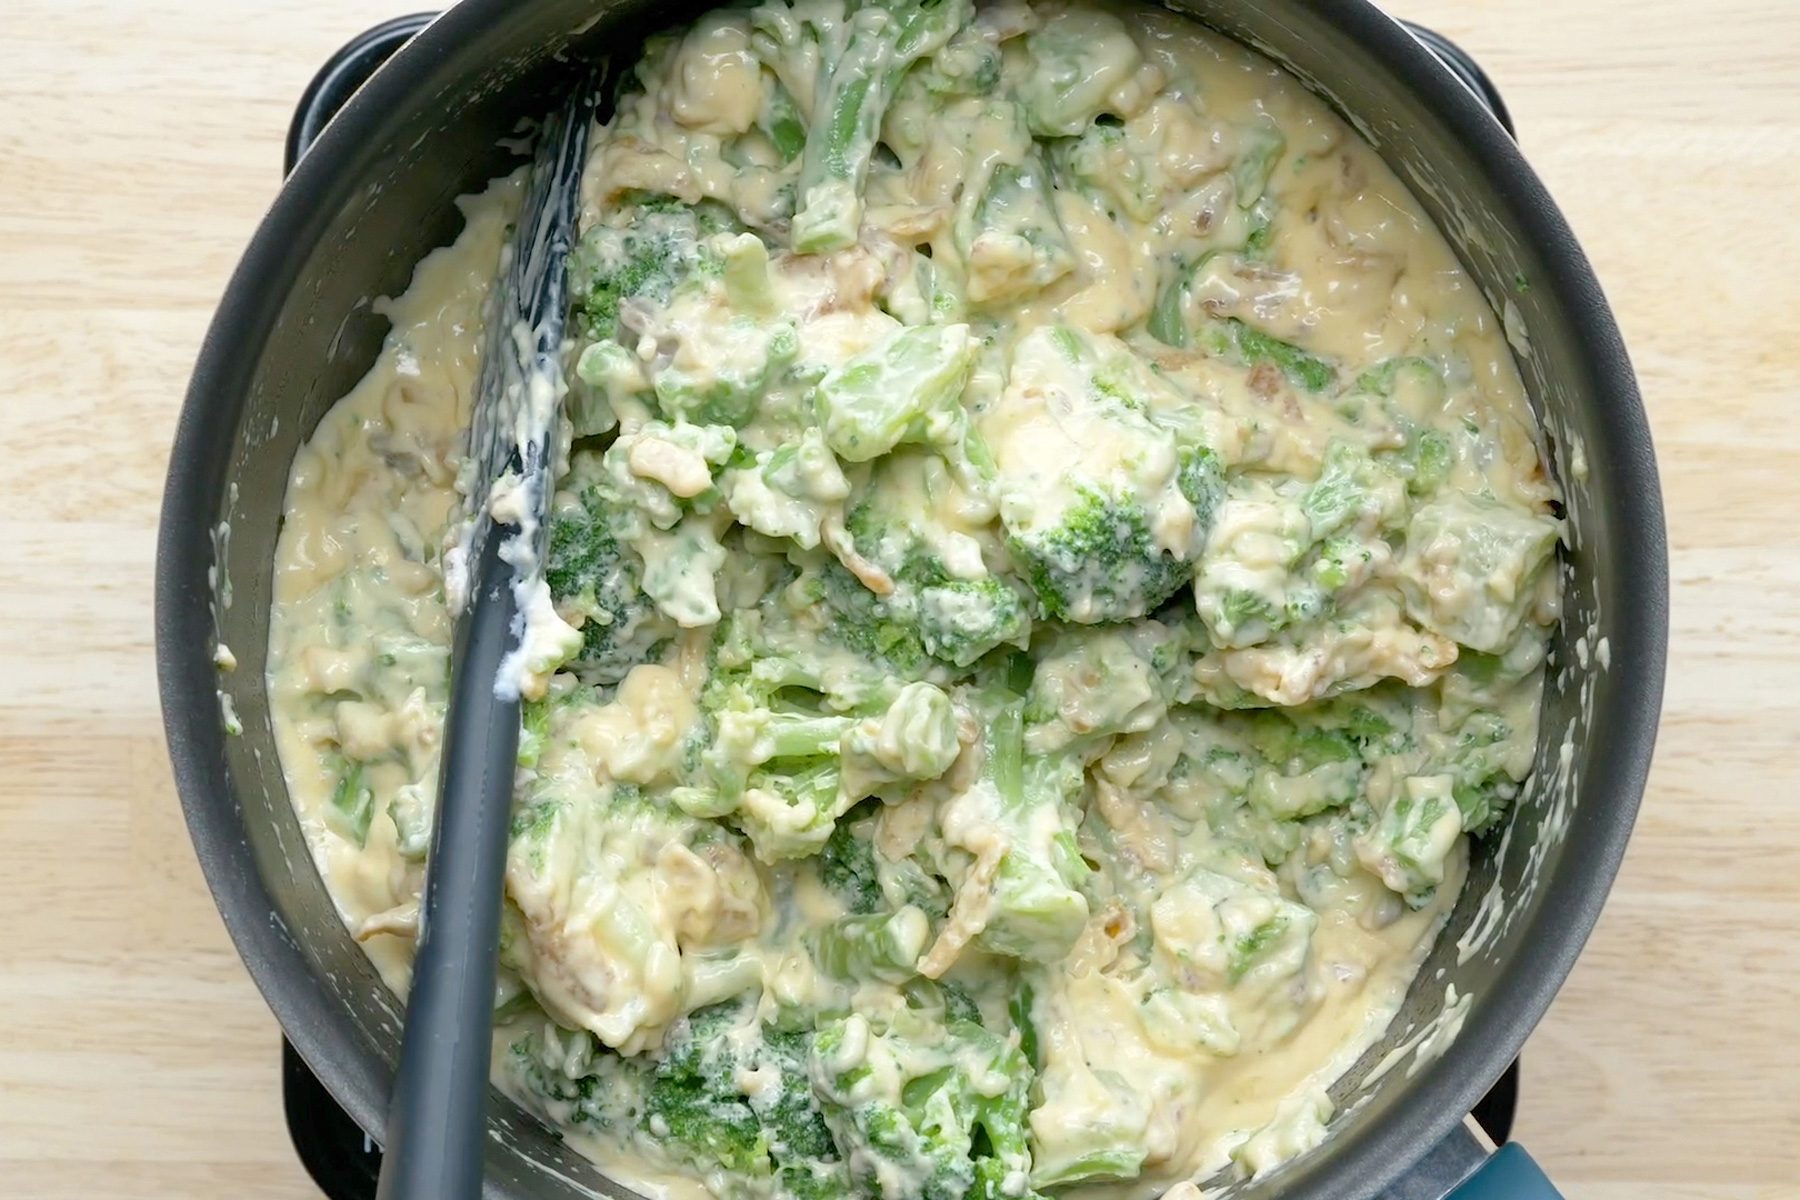 Broccoli mixed with cheese and other ingredients in a saucepan